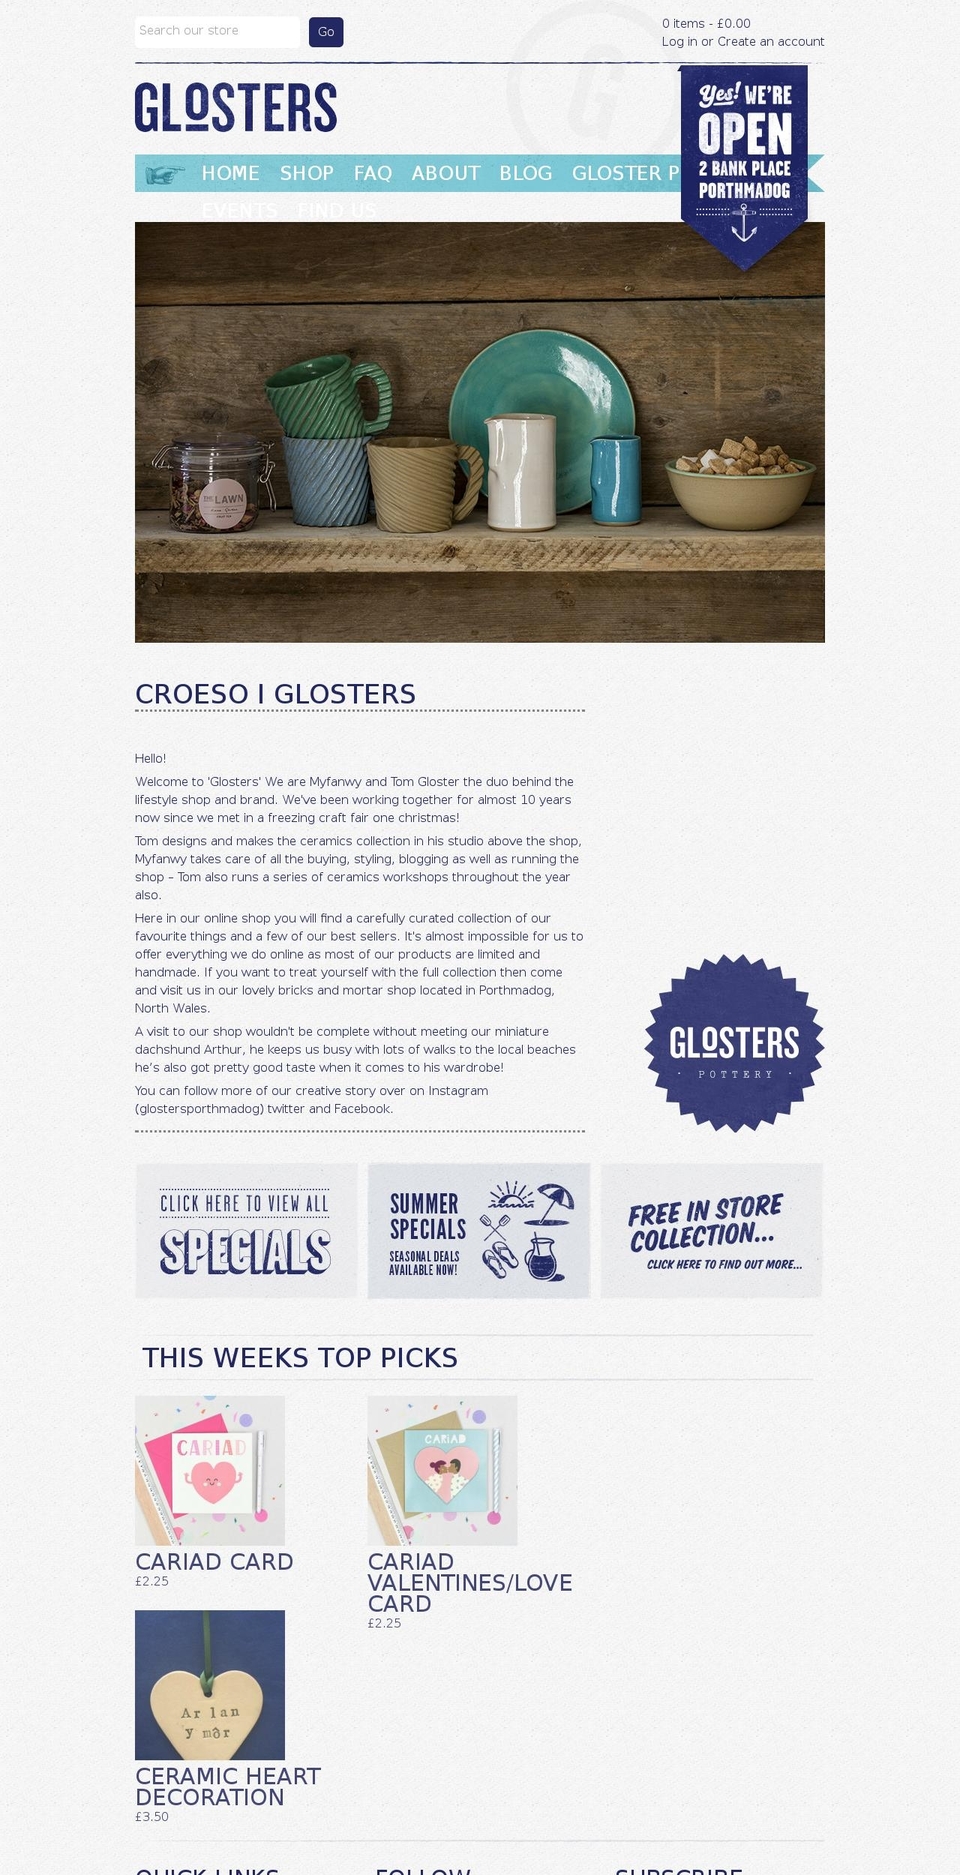 Mr Parker Shopify theme site example glosters.co.uk